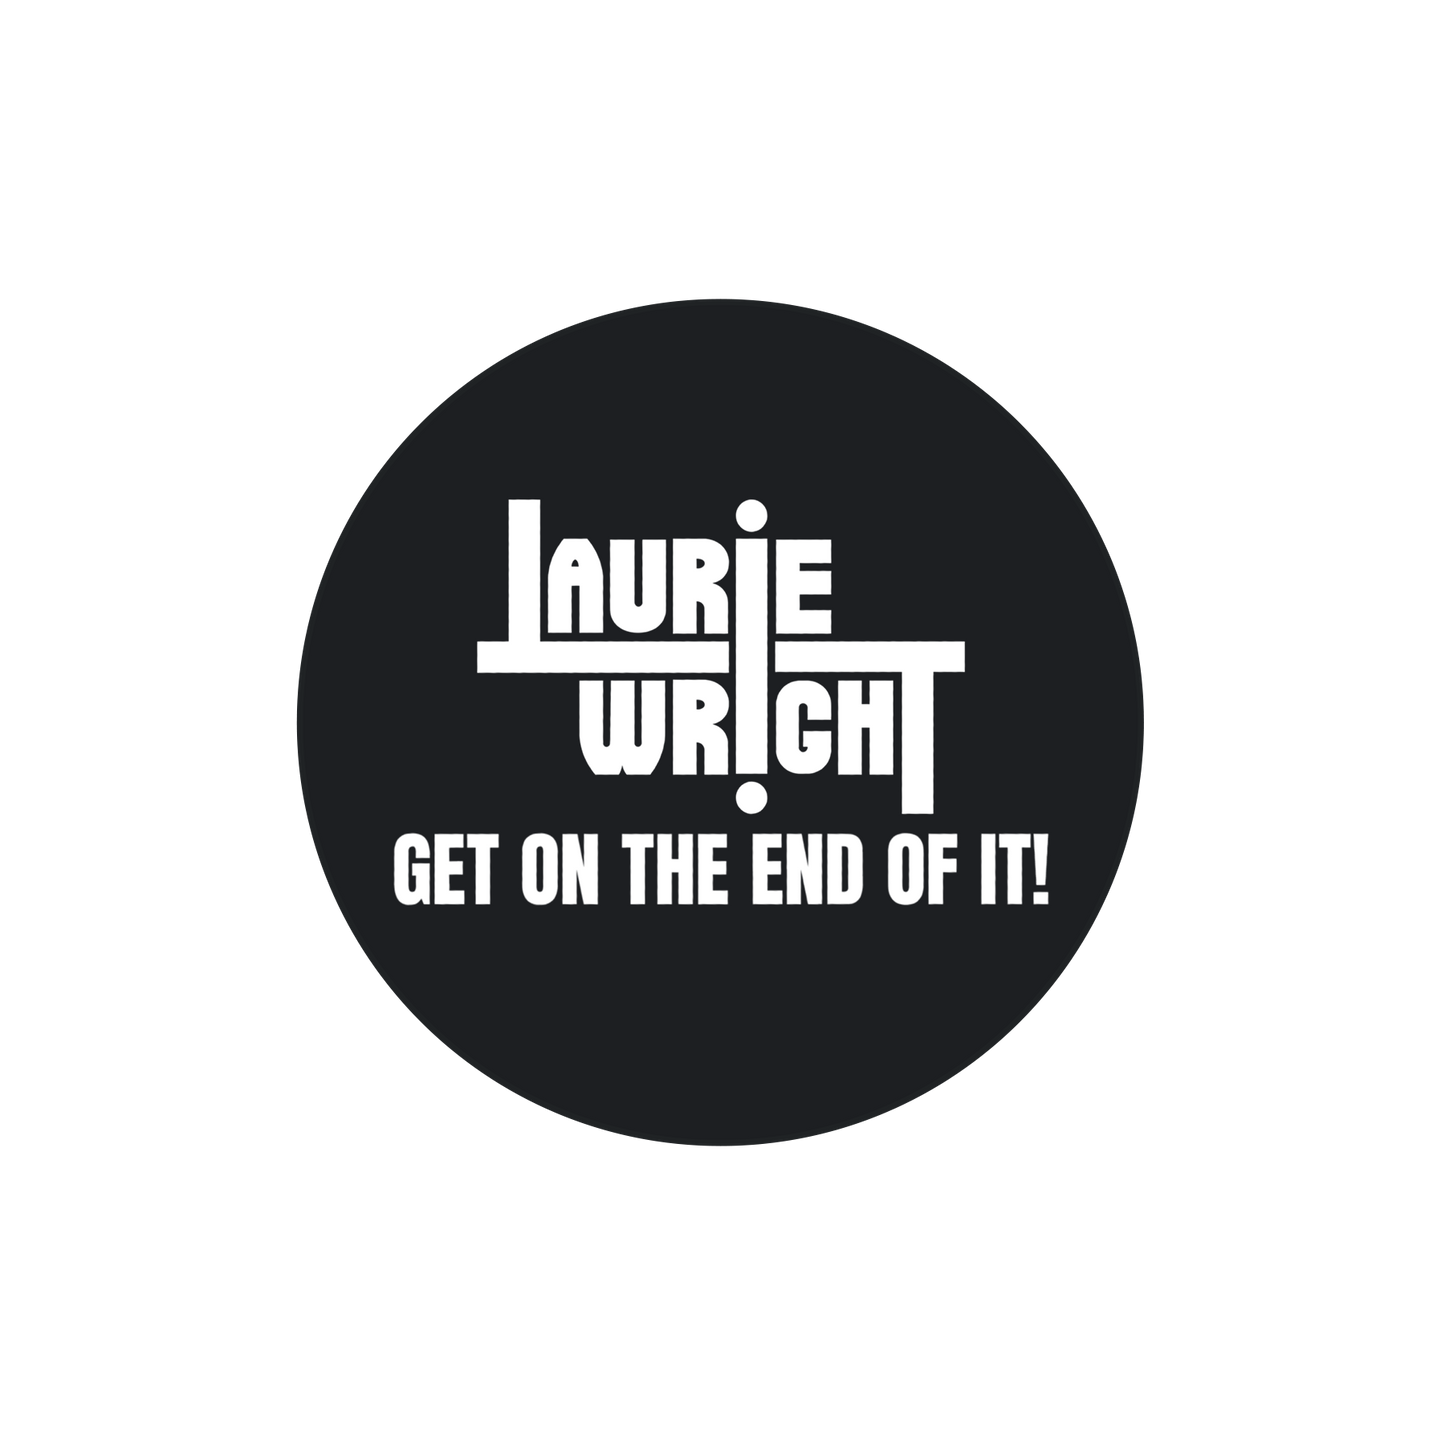 Laurie Wright 'Get On The End Of It!' Badge